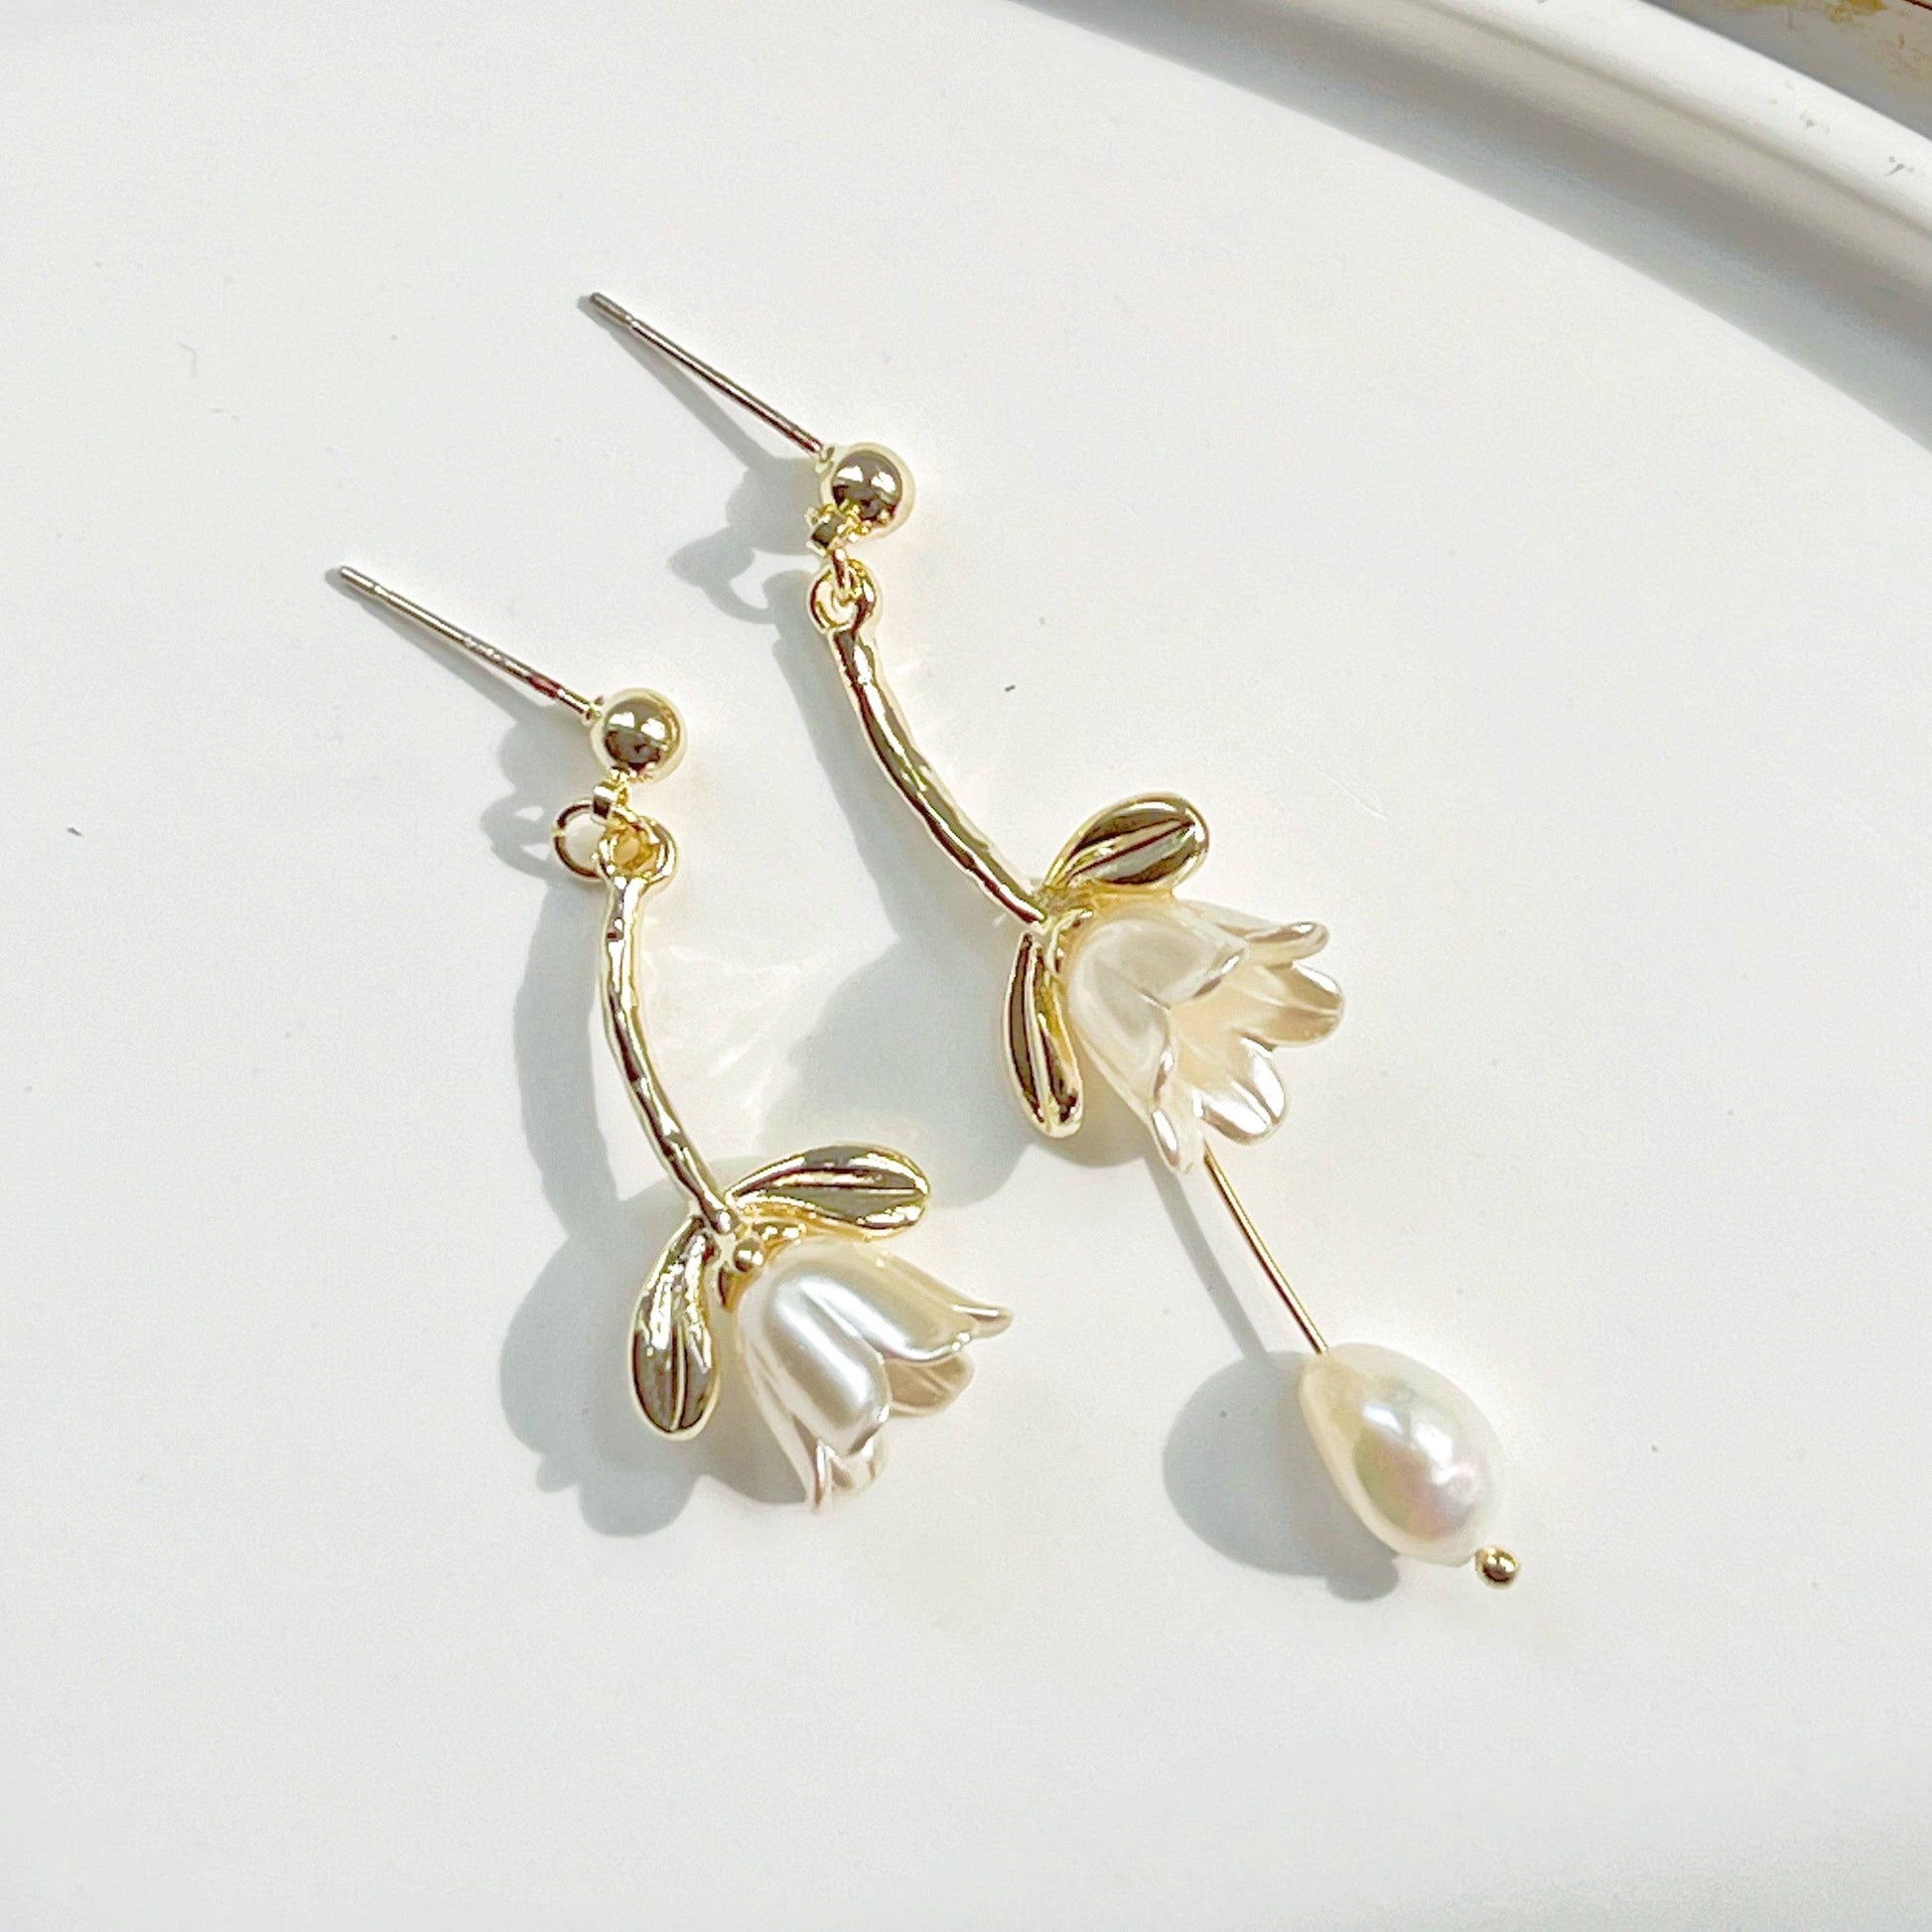 White Lily of the Valley Earrings - Bell Shape Flower with Pearl Drop Earrings-Ninaouity